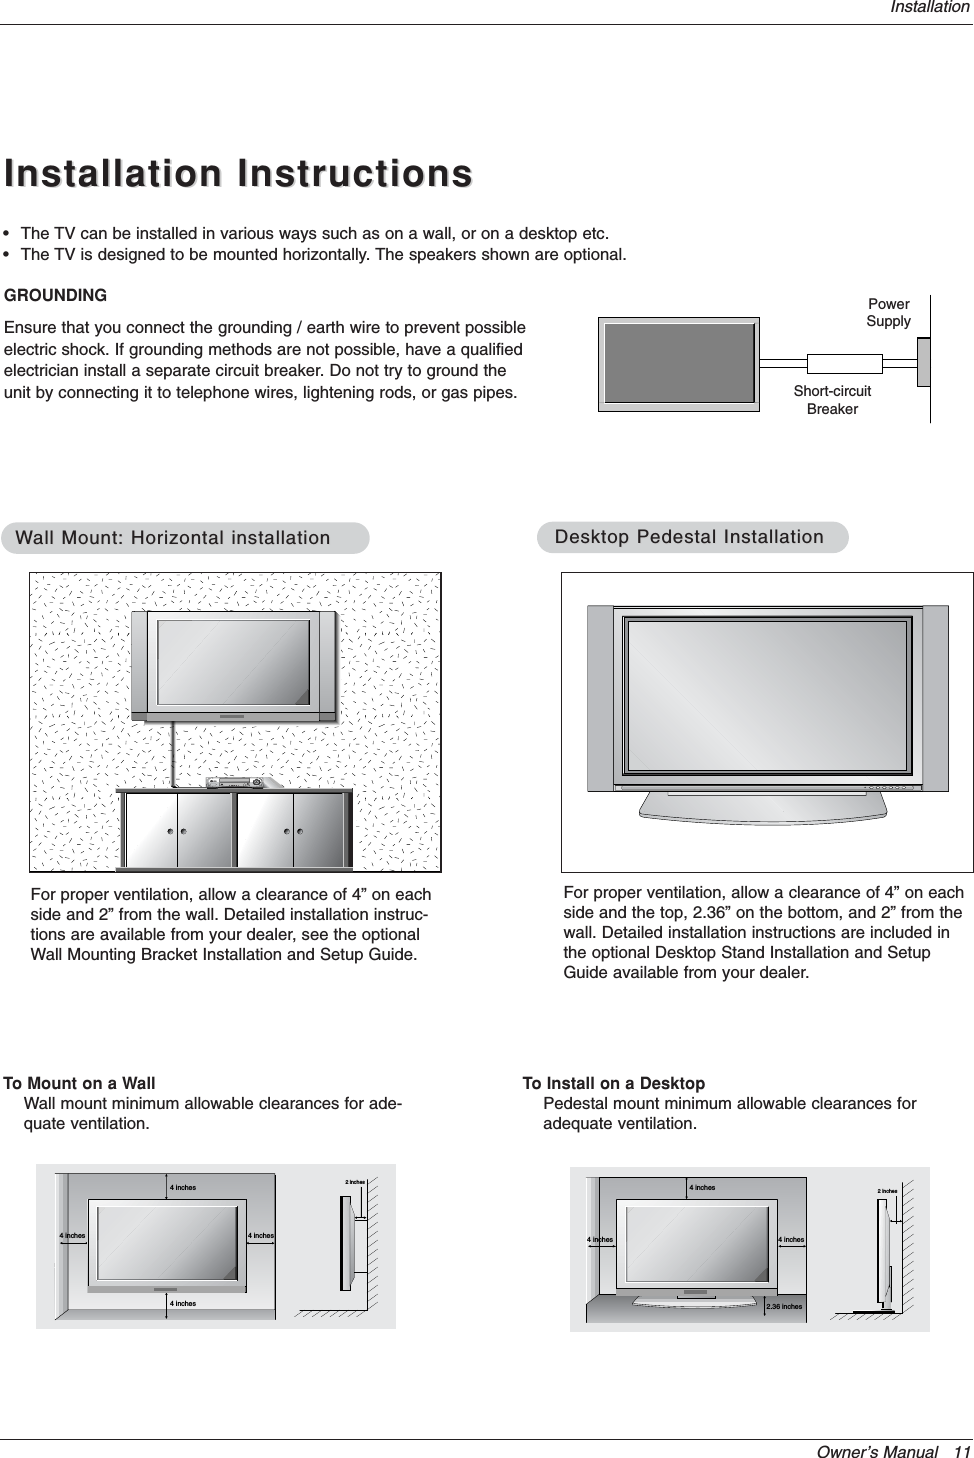 Owner’s Manual   11InstallationInstallation InstructionsInstallation Instructions• The TV can be installed in various ways such as on a wall, or on a desktop etc.• The TV is designed to be mounted horizontally. The speakers shown are optional.GROUNDINGEnsure that you connect the grounding / earth wire to prevent possibleelectric shock. If grounding methods are not possible, have a qualifiedelectrician install a separate circuit breaker. Do not try to ground theunit by connecting it to telephone wires, lightening rods, or gas pipes.PowerSupplyShort-circuitBreaker4 inches4 inches4 inches4 inches2 inchesWWall Mount: Horizontal installationall Mount: Horizontal installationFor proper ventilation, allow a clearance of 4” on eachside and 2” from the wall. Detailed installation instruc-tions are available from your dealer, see the optionalWall Mounting Bracket Installation and Setup Guide.4 inches4 inches2.36 inches4 inches2 inchesDesktop Pedestal InstallationDesktop Pedestal InstallationFor proper ventilation, allow a clearance of 4” on eachside and the top, 2.36” on the bottom, and 2” from thewall. Detailed installation instructions are included inthe optional Desktop Stand Installation and SetupGuide available from your dealer.To Mount on a WallWall mount minimum allowable clearances for ade-quate ventilation.To Install on a DesktopPedestal mount minimum allowable clearances foradequate ventilation.